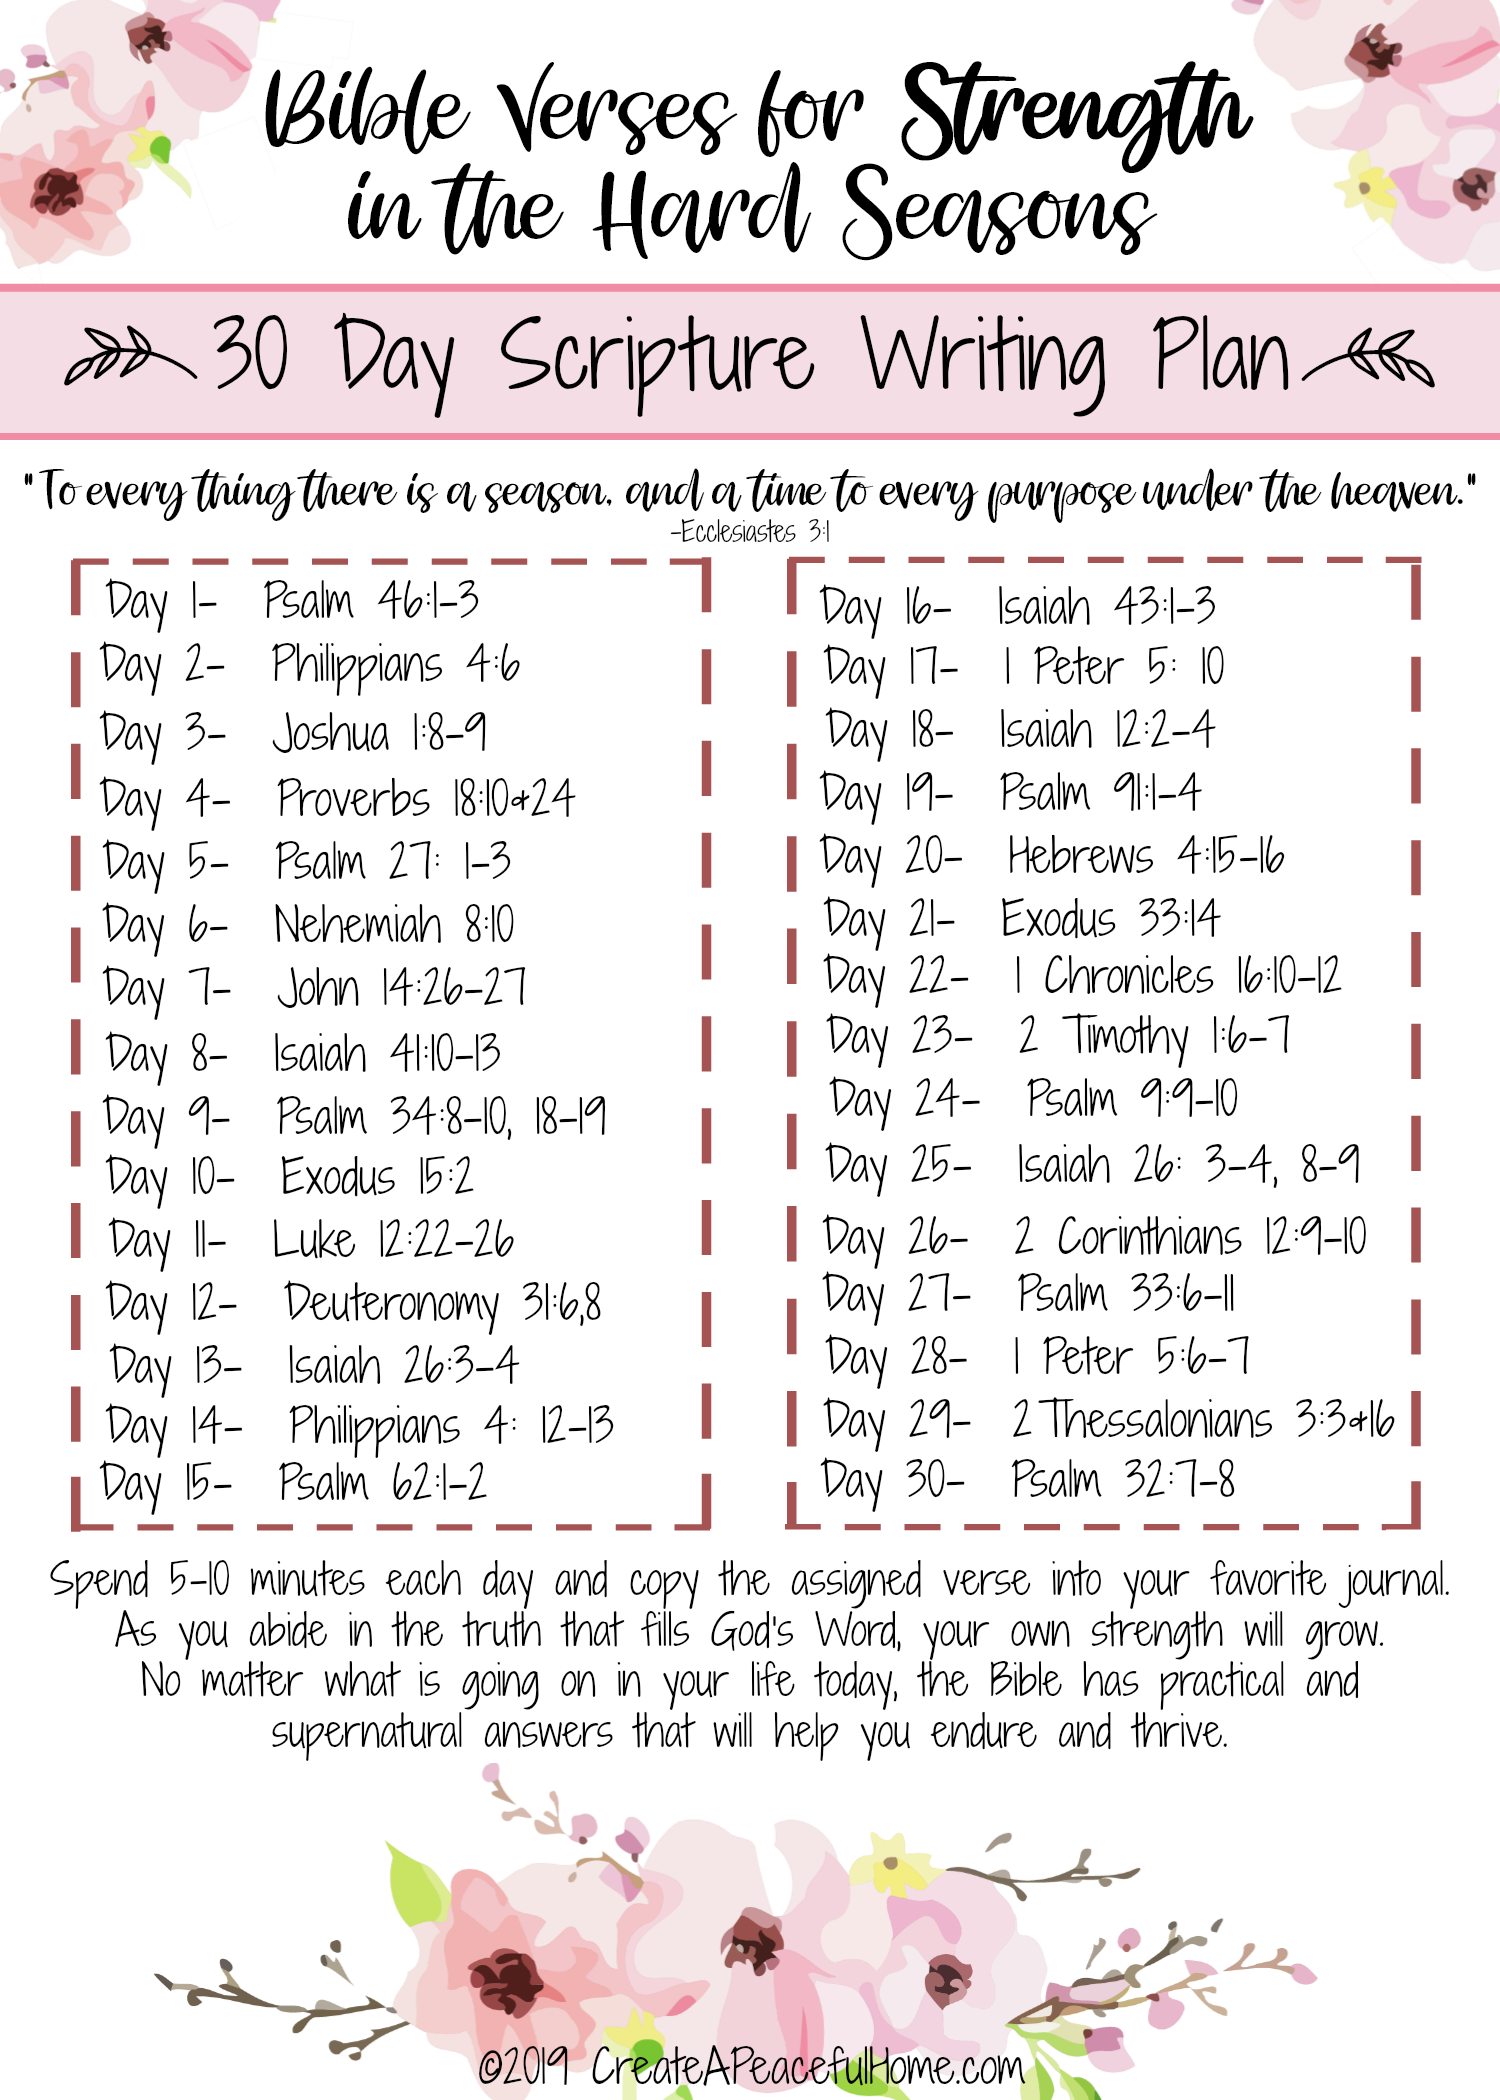 Bible Verses for Strength in the Hard Seasons: 30 Day Scripture Writing Plan